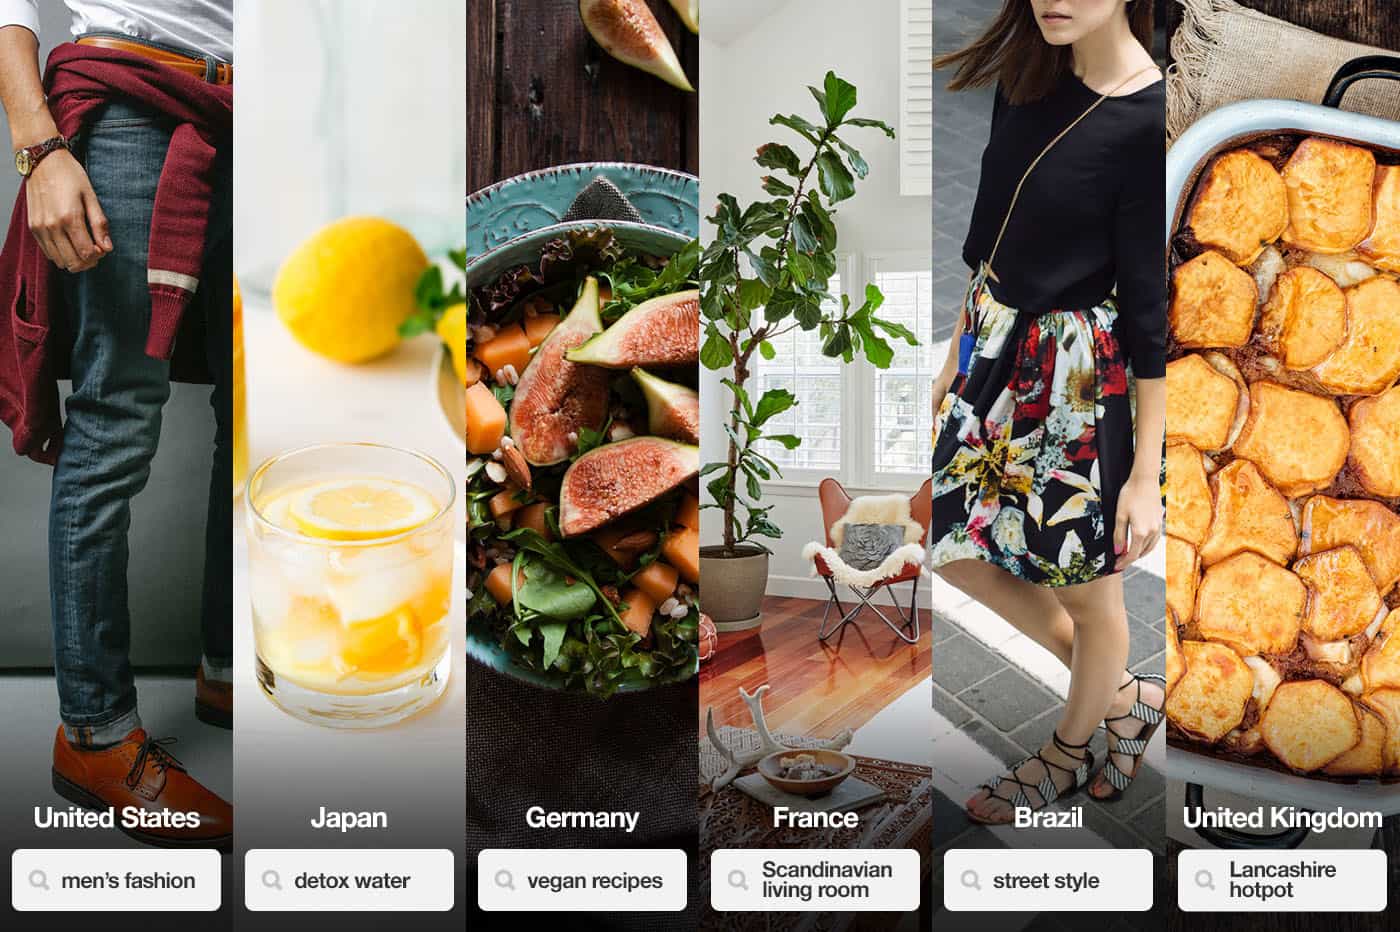 Top 10 ideas people are searching for around the world on Pinterest